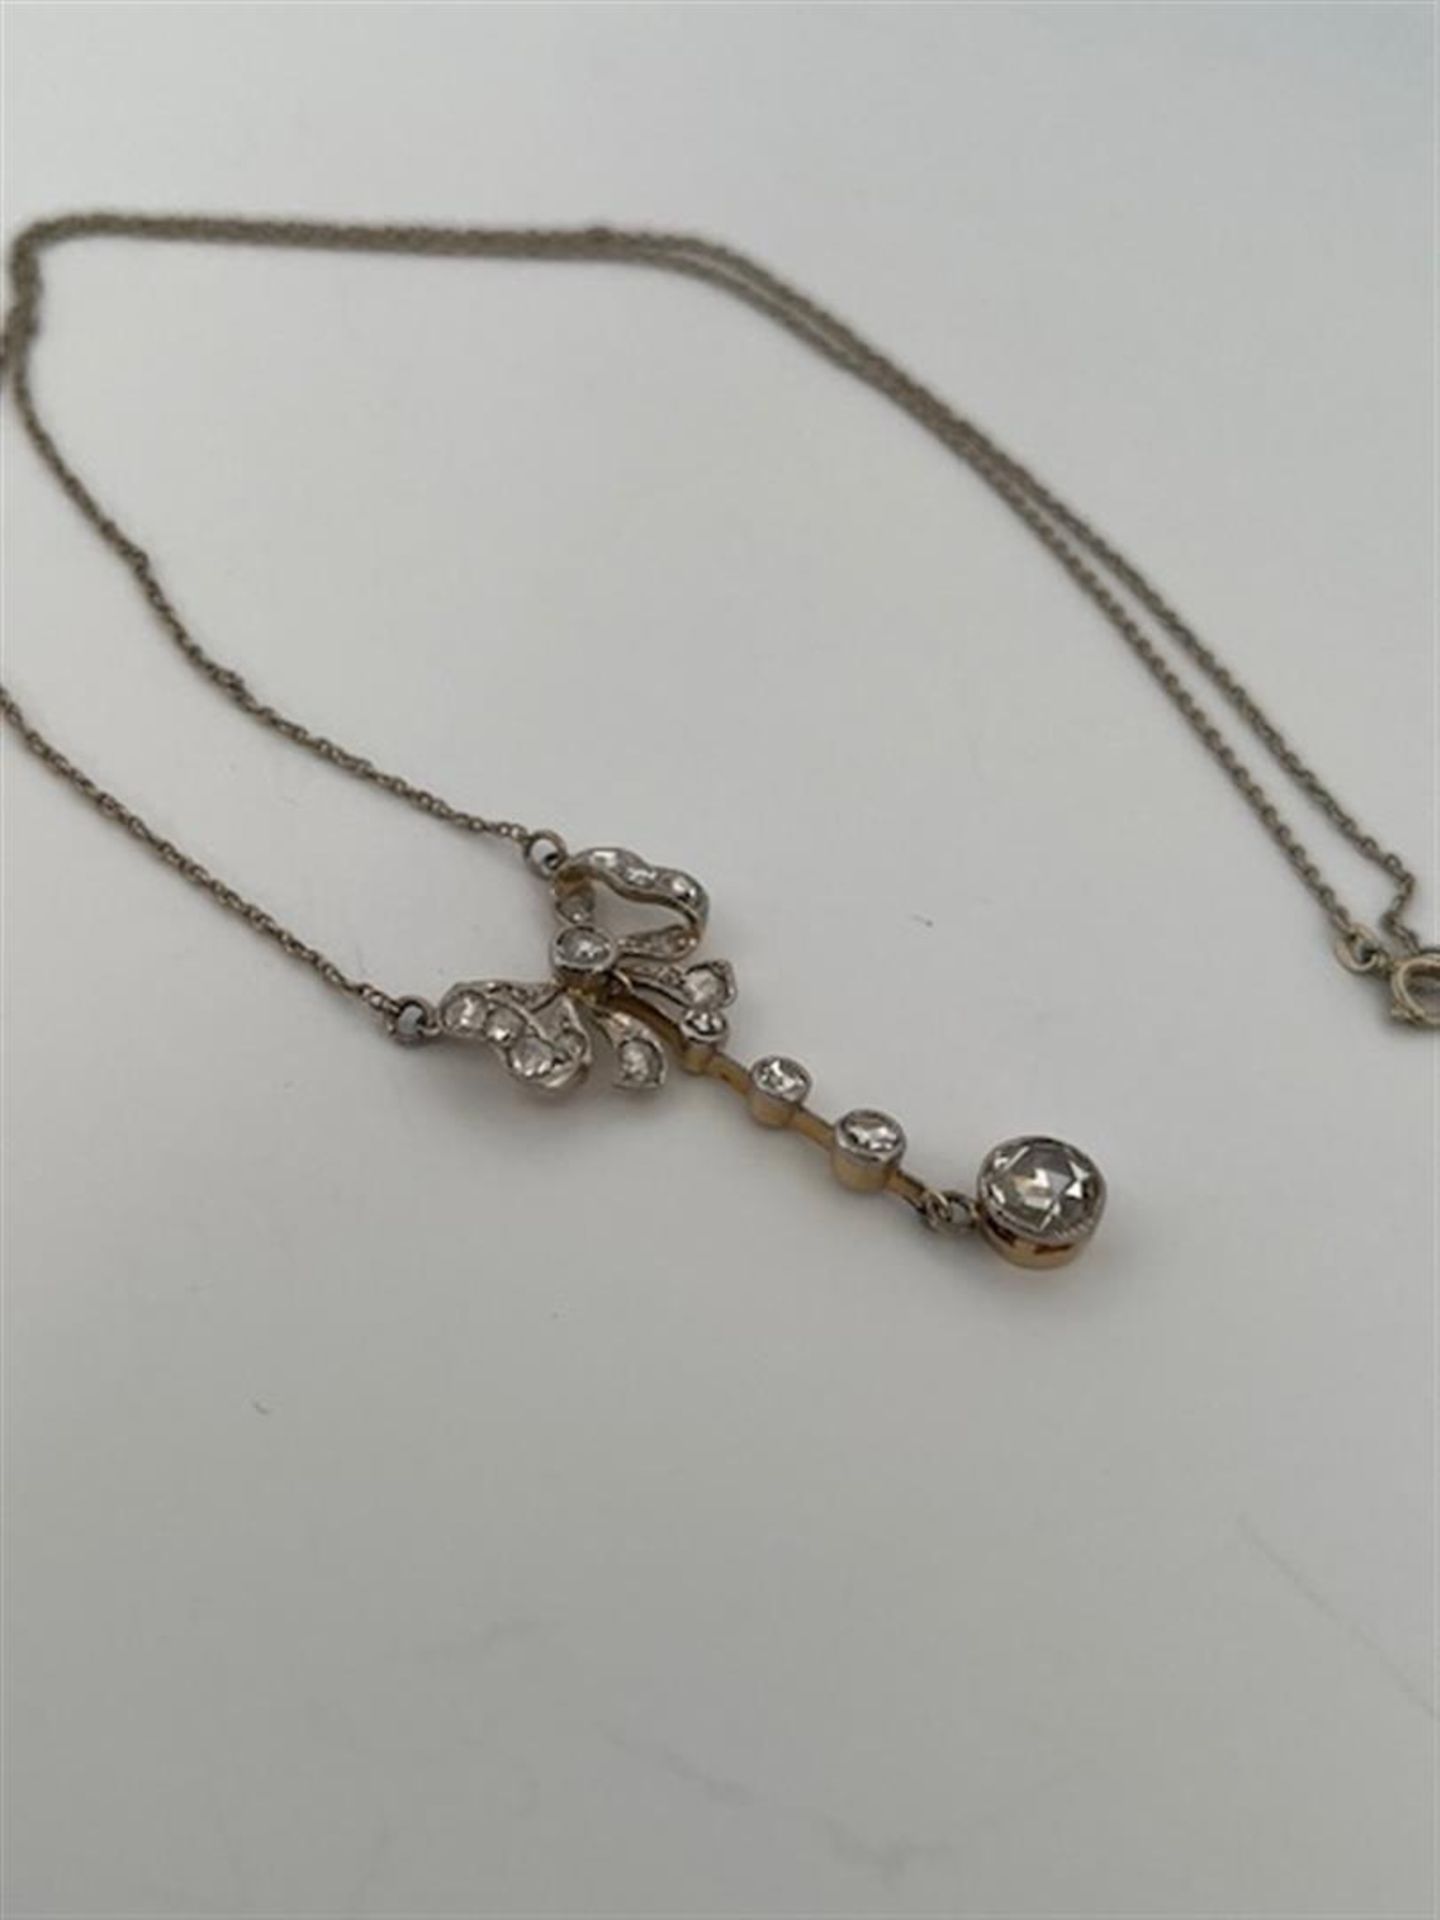 9kt bicolor gold 'Romantic vintage' necklace set with diamonds.
The pendant on the necklace is set w - Image 3 of 6